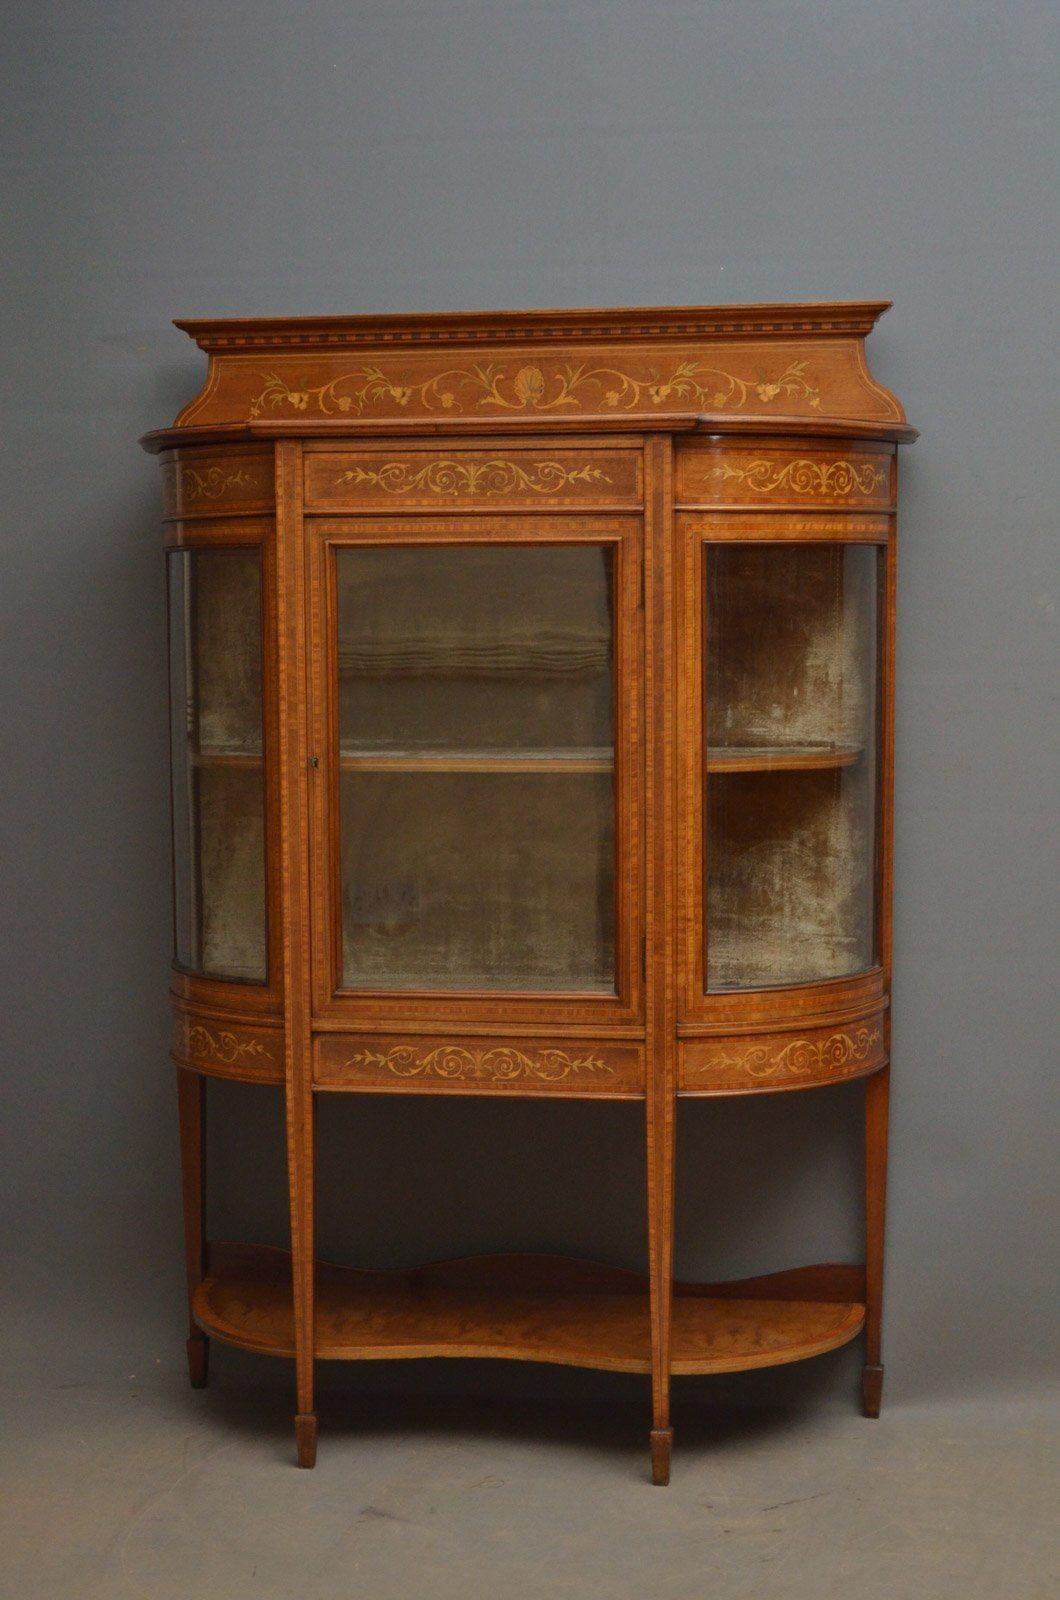 Sn4481 Stunning Edwardian, mahogany and inlaid china cabinet, having shaped and inlaid upstand, moulded cornice above neoclassical inlays to frieze, single glazed door enclosing shelf, all flanked by glazed, bowed sides with satinwood crossbanding,